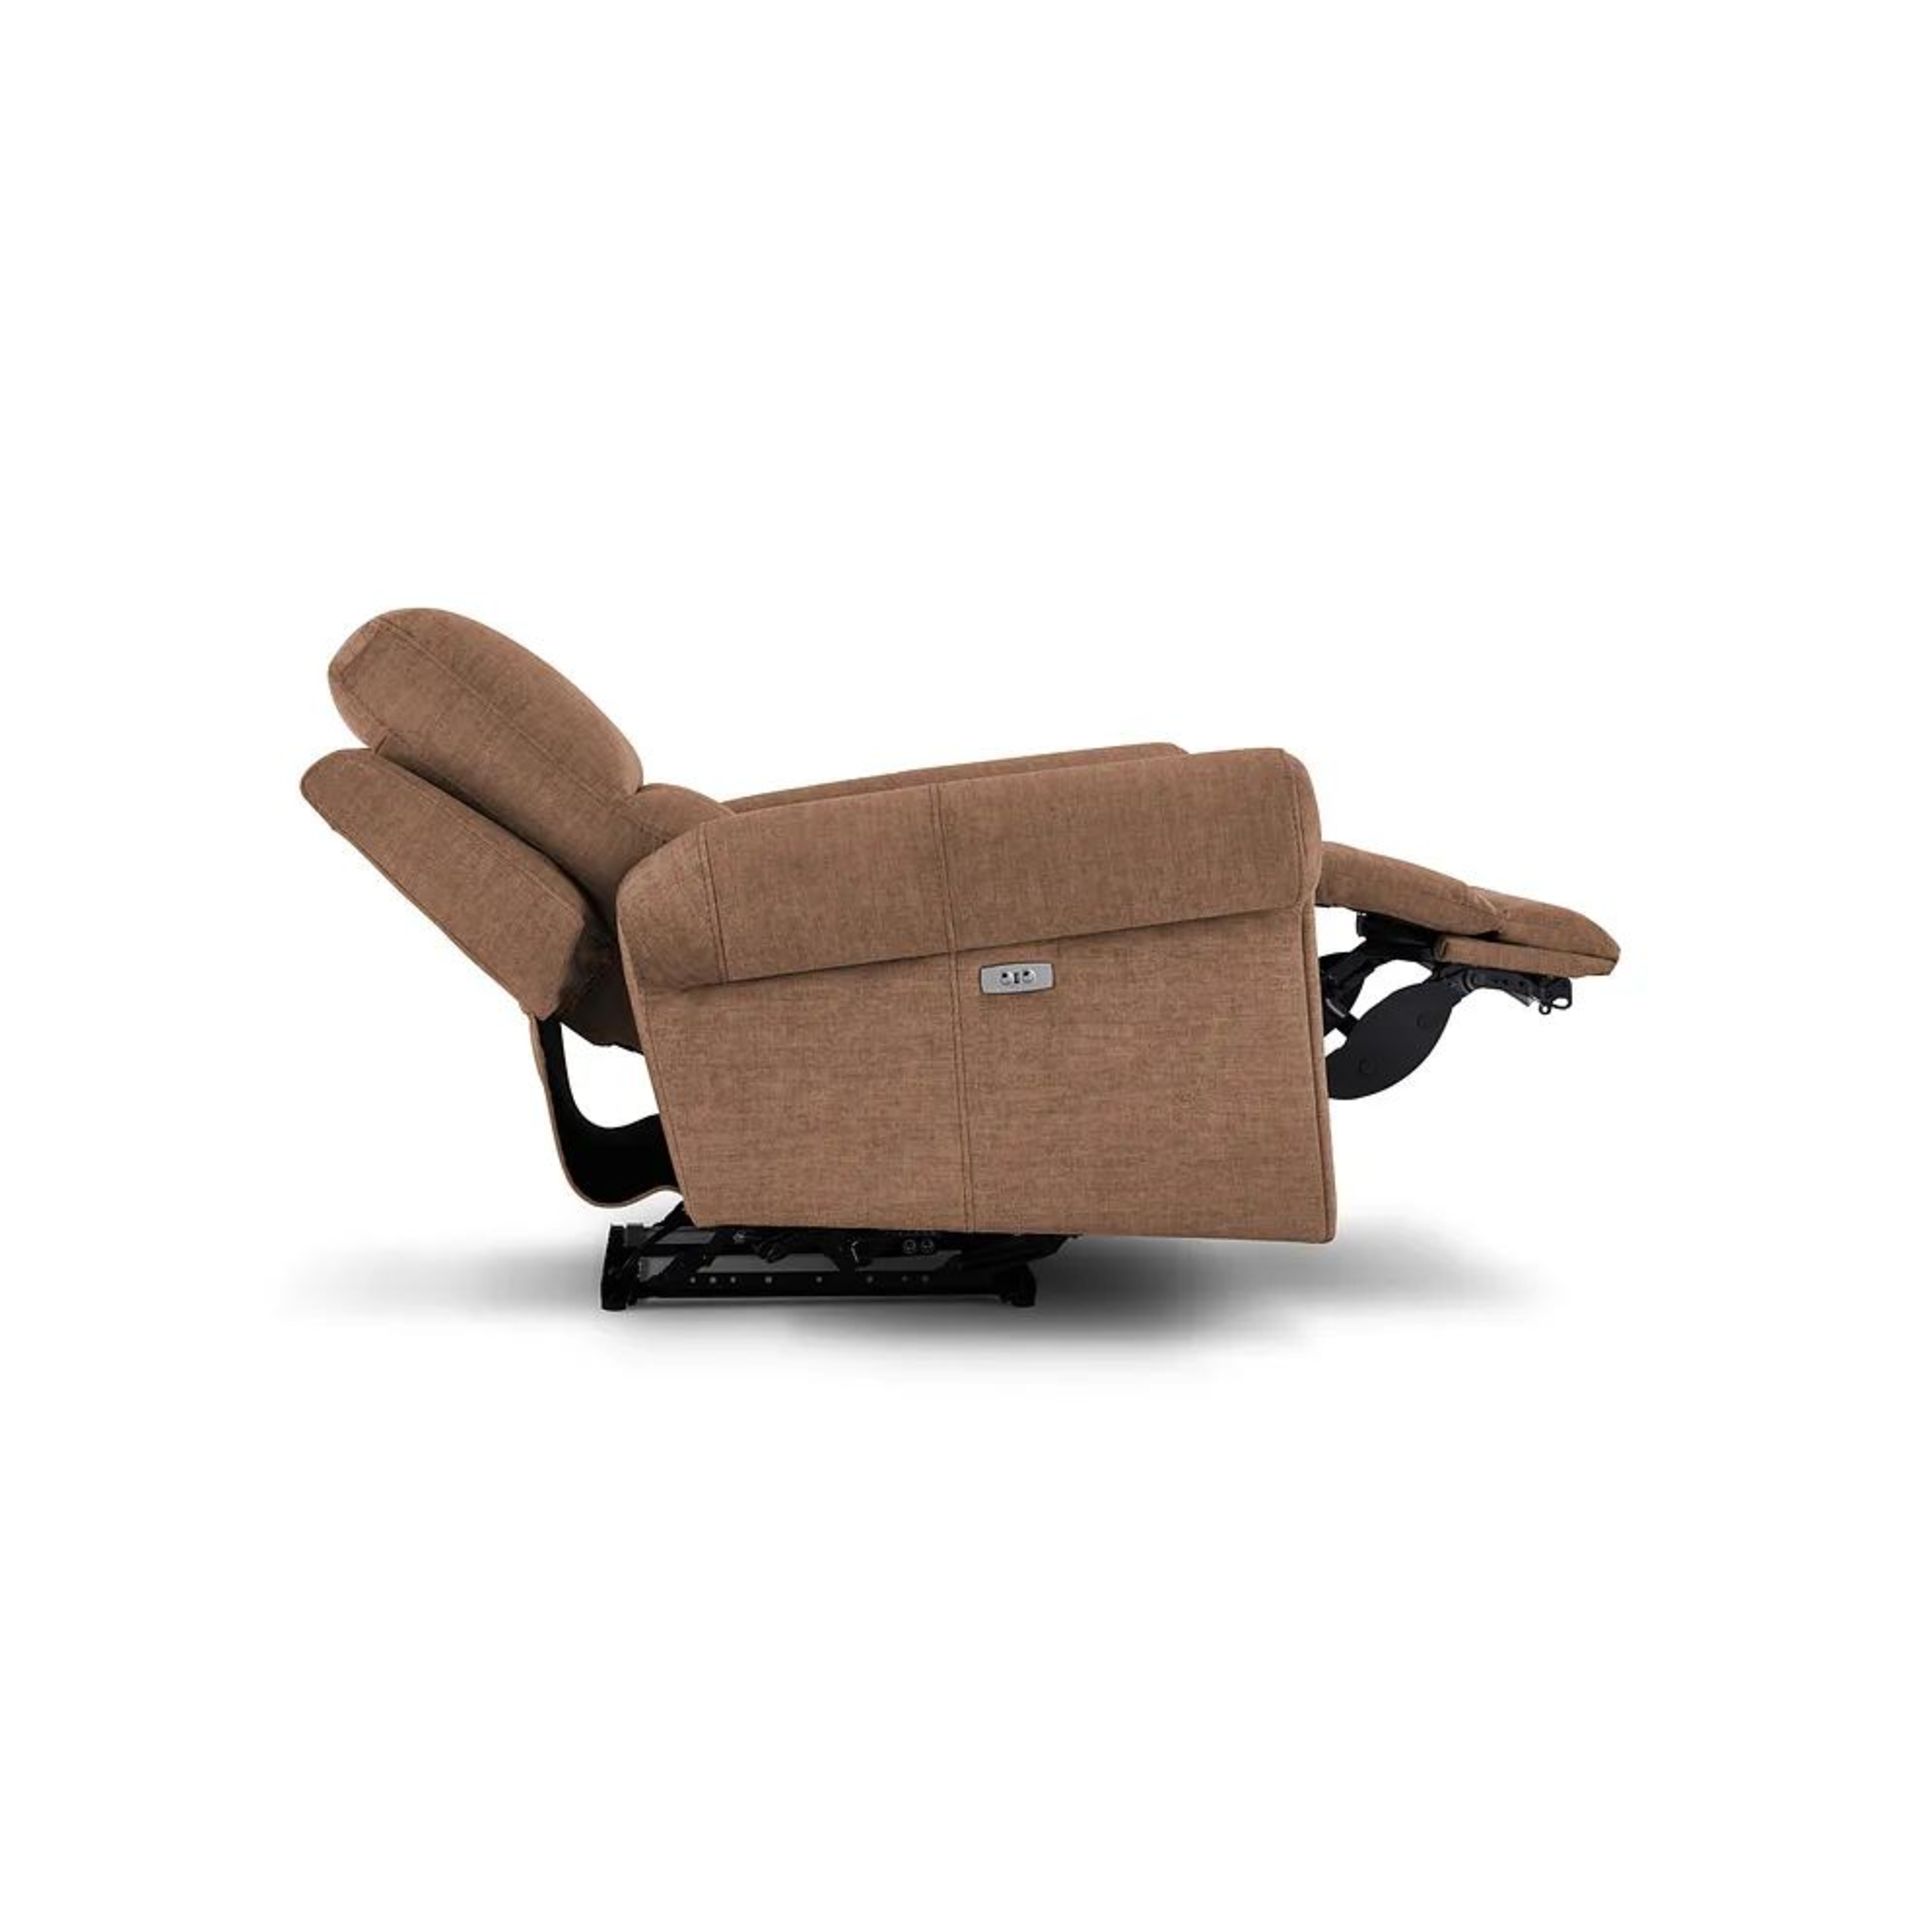 BRAND NEW COLORADO Electric Recliner Armchair - PLUSH BROWN FABRIC. RRP £799. Shown here in Plush - Bild 7 aus 11